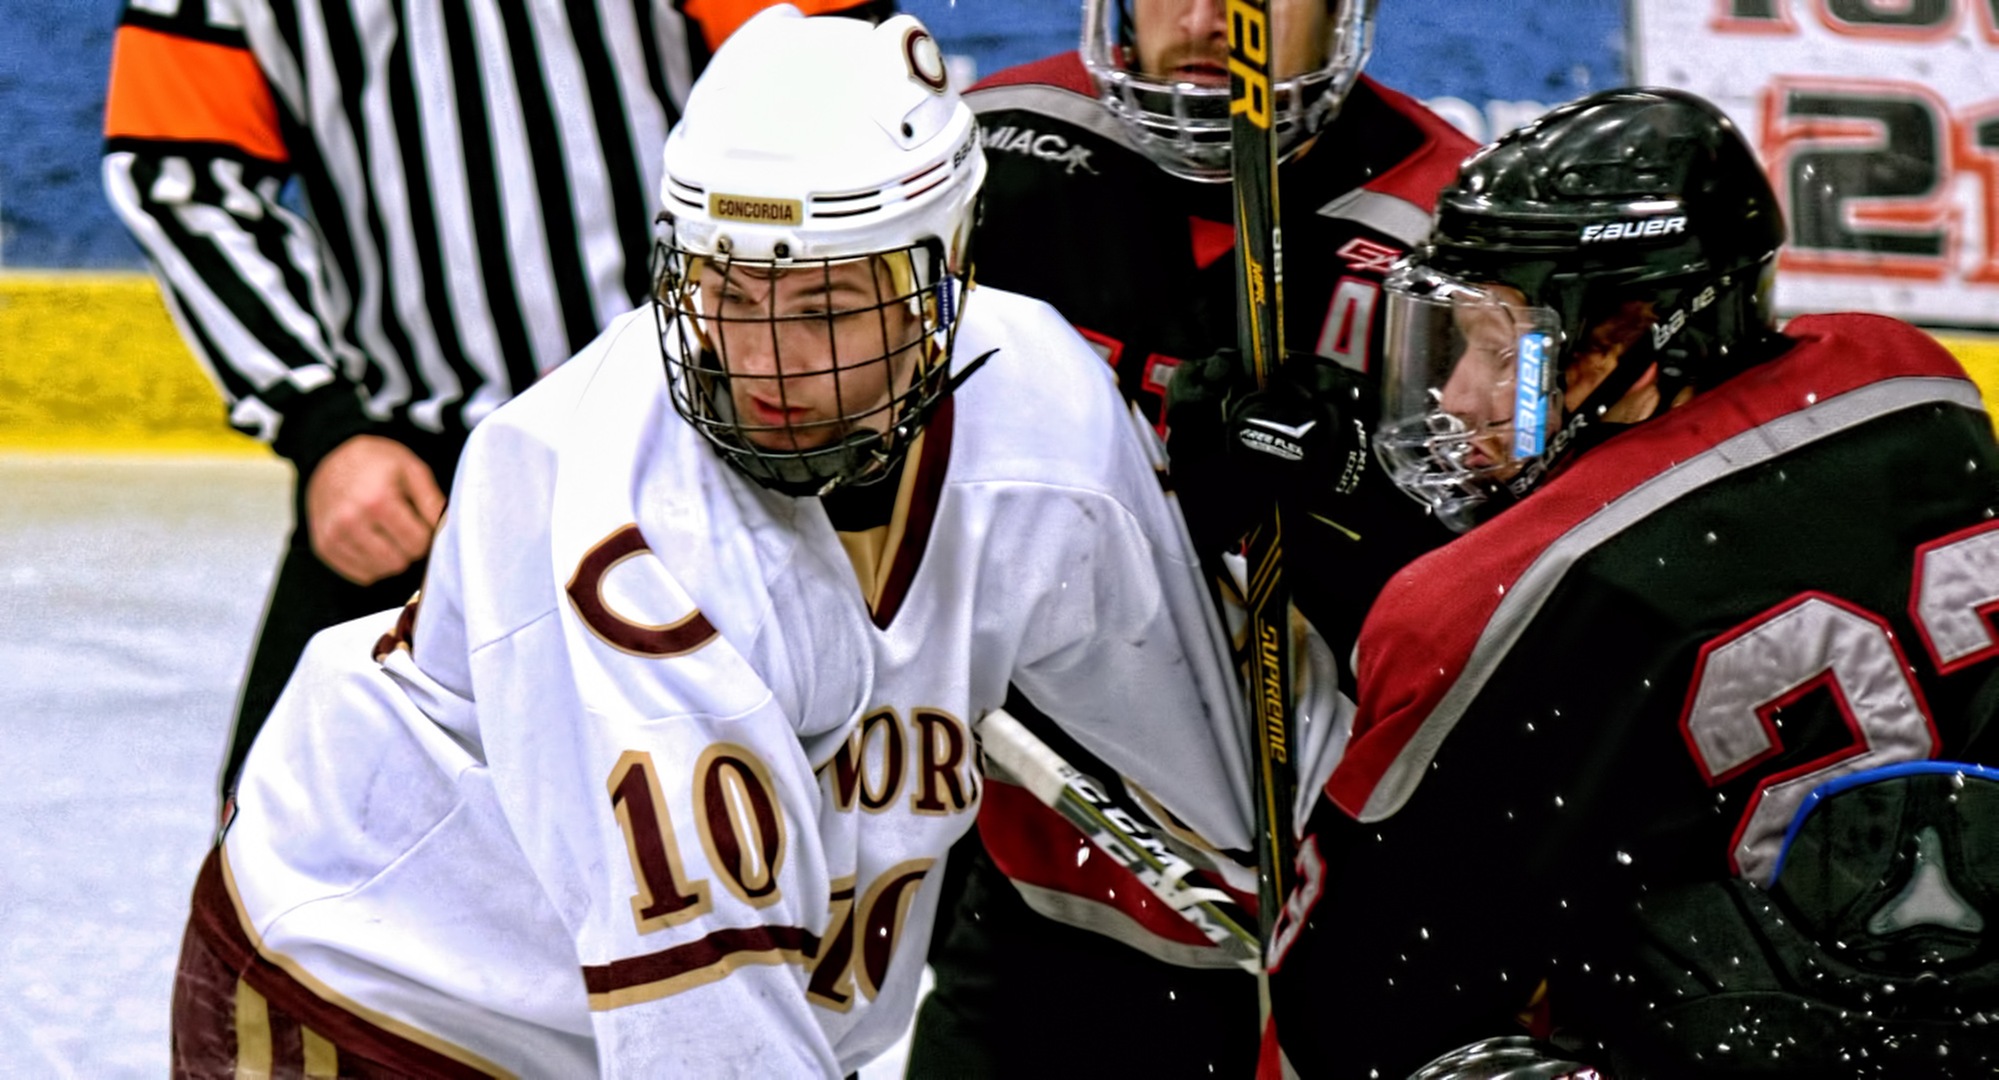 Senior captain Zach Doerring scored his second goal in as many games in the Cobbers' game with Augsburg.